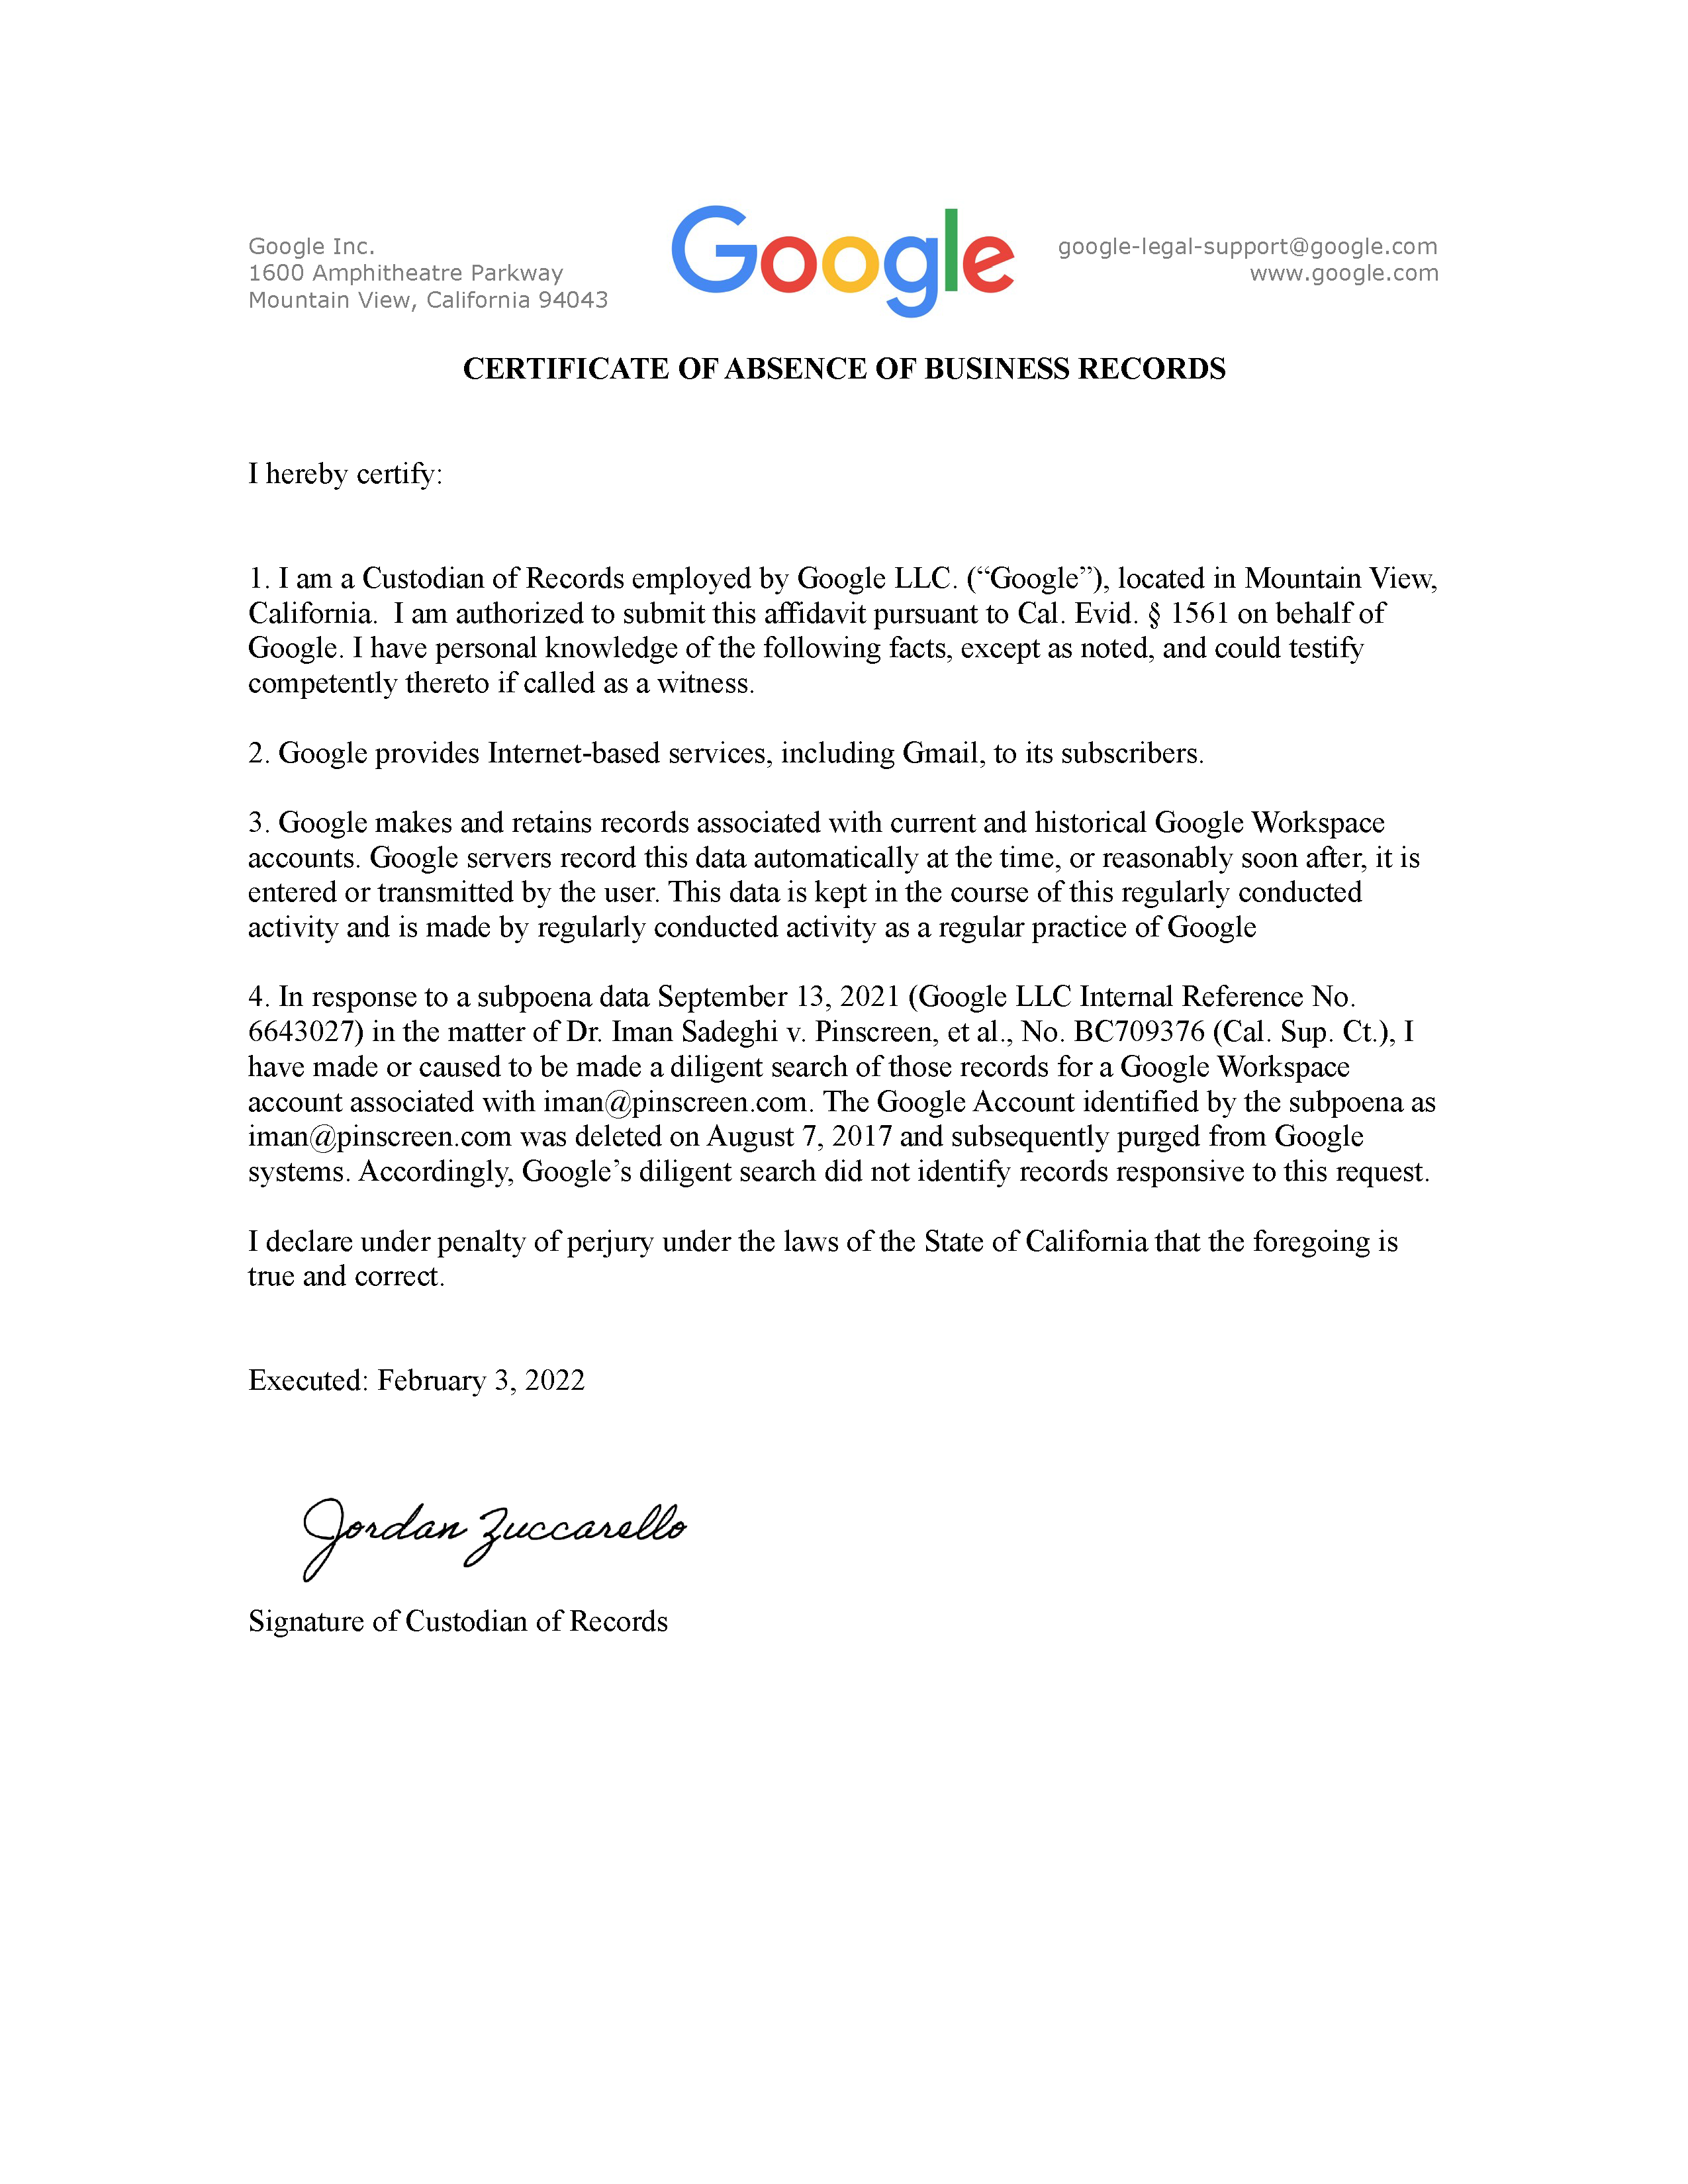 Google's Certificate of No Records re Pinscreen's Destruction of Evidence Page 2